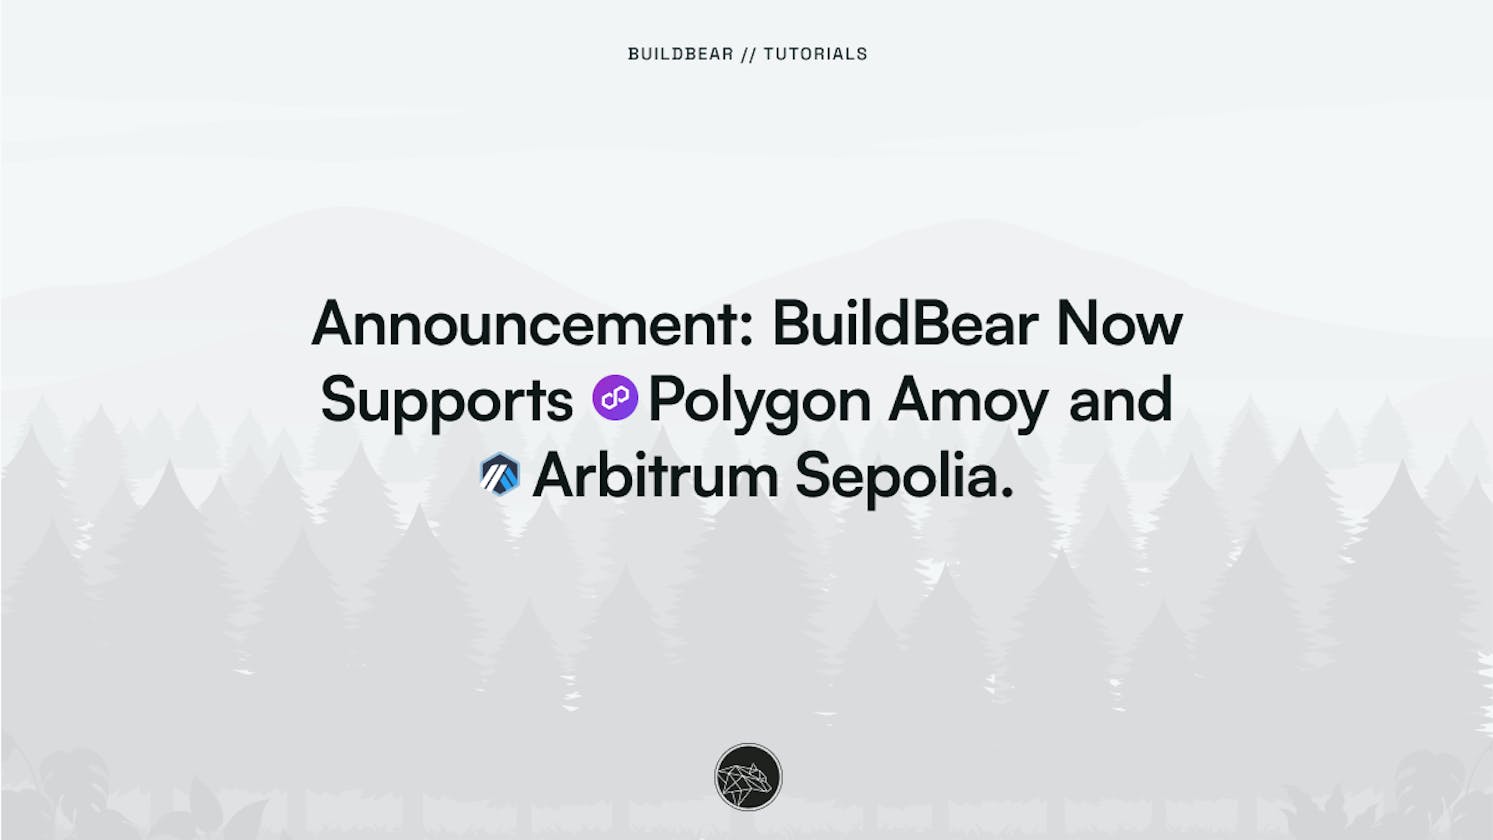 Announcement: BuildBear Now Supports Polygon Amoy and Arbitrum Sepolia.